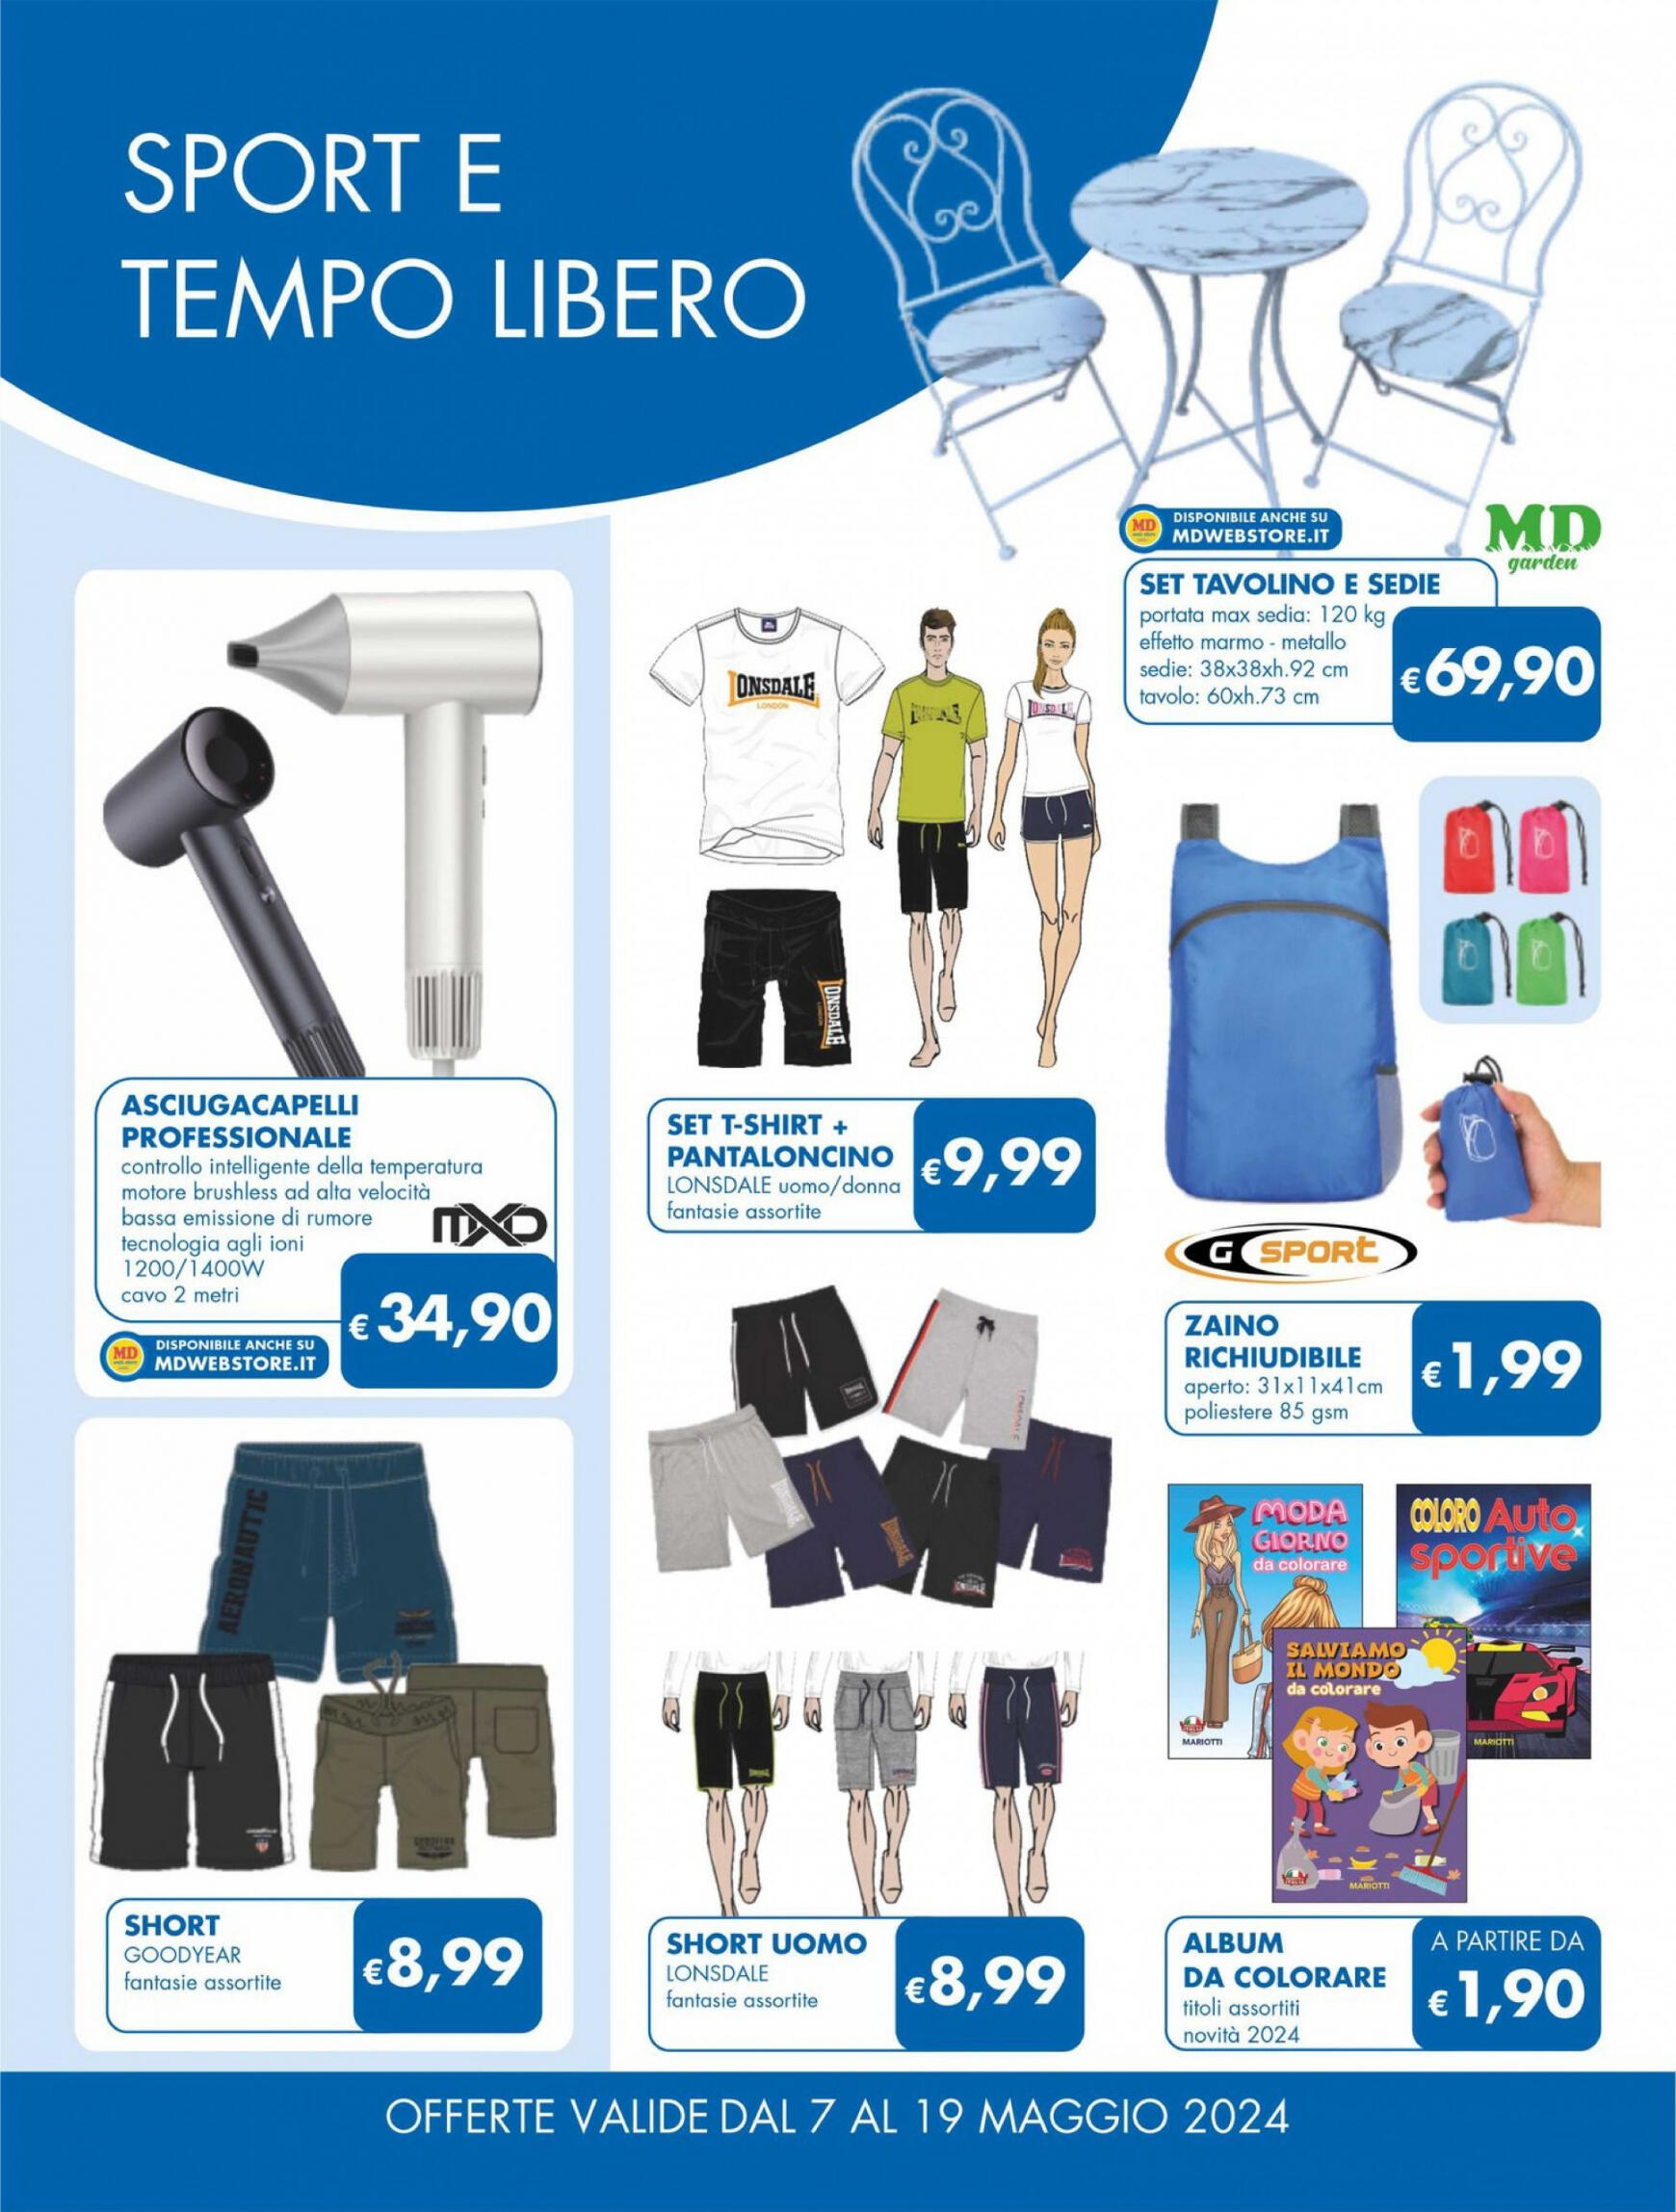 md-discount - Nuovo volantino MD - MD Discount 07.05. - 19.05. - page: 23